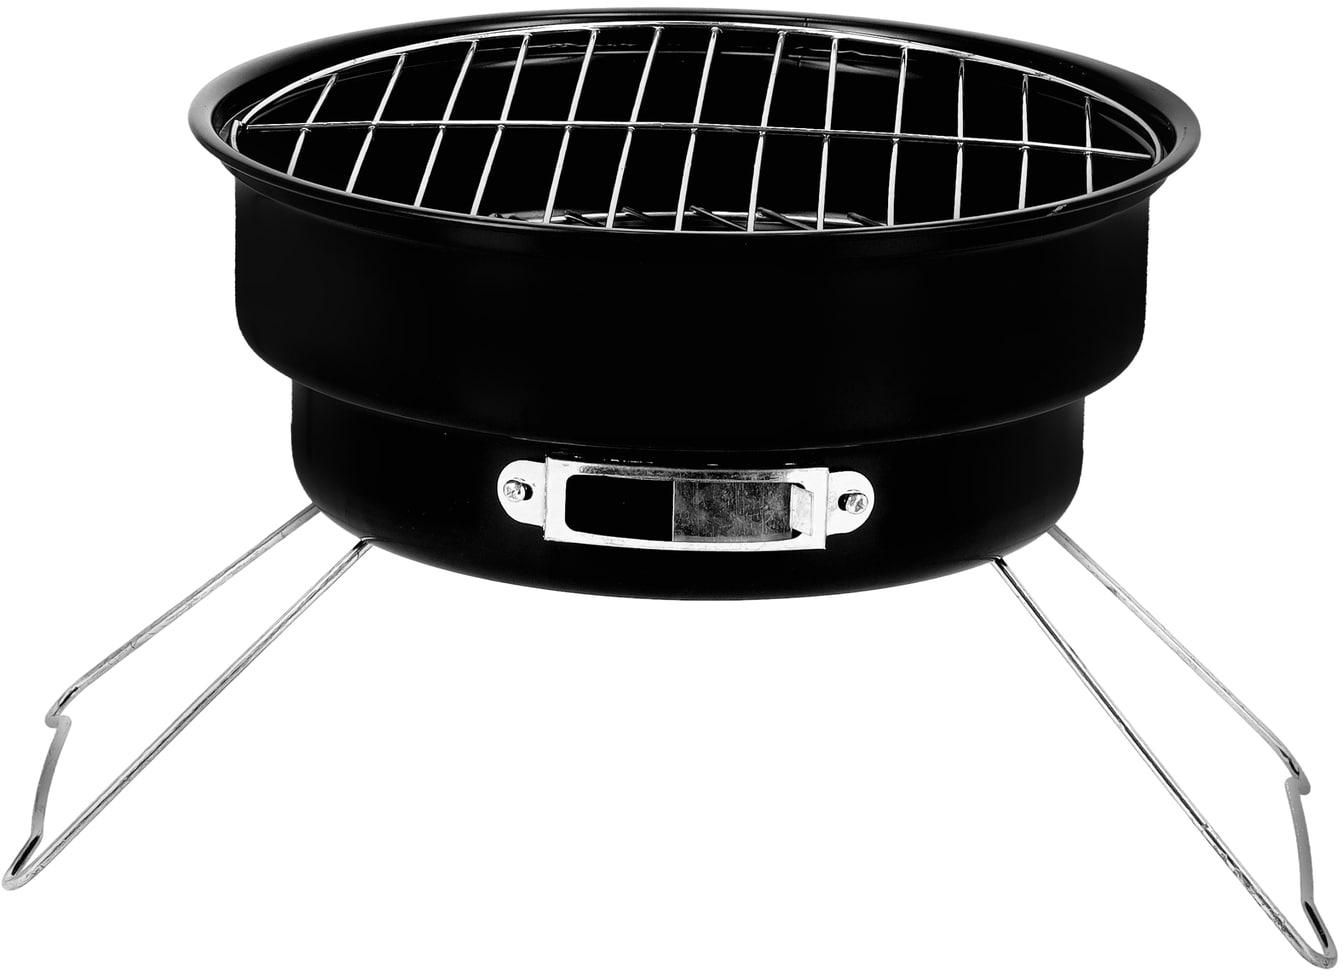 Royalford Round Barbeque Stands With Grill, Foldable, Rf10356 - Durable Iron Construction Larger Grilling Area, Folding Camping Picnic Garden Festival Cooker